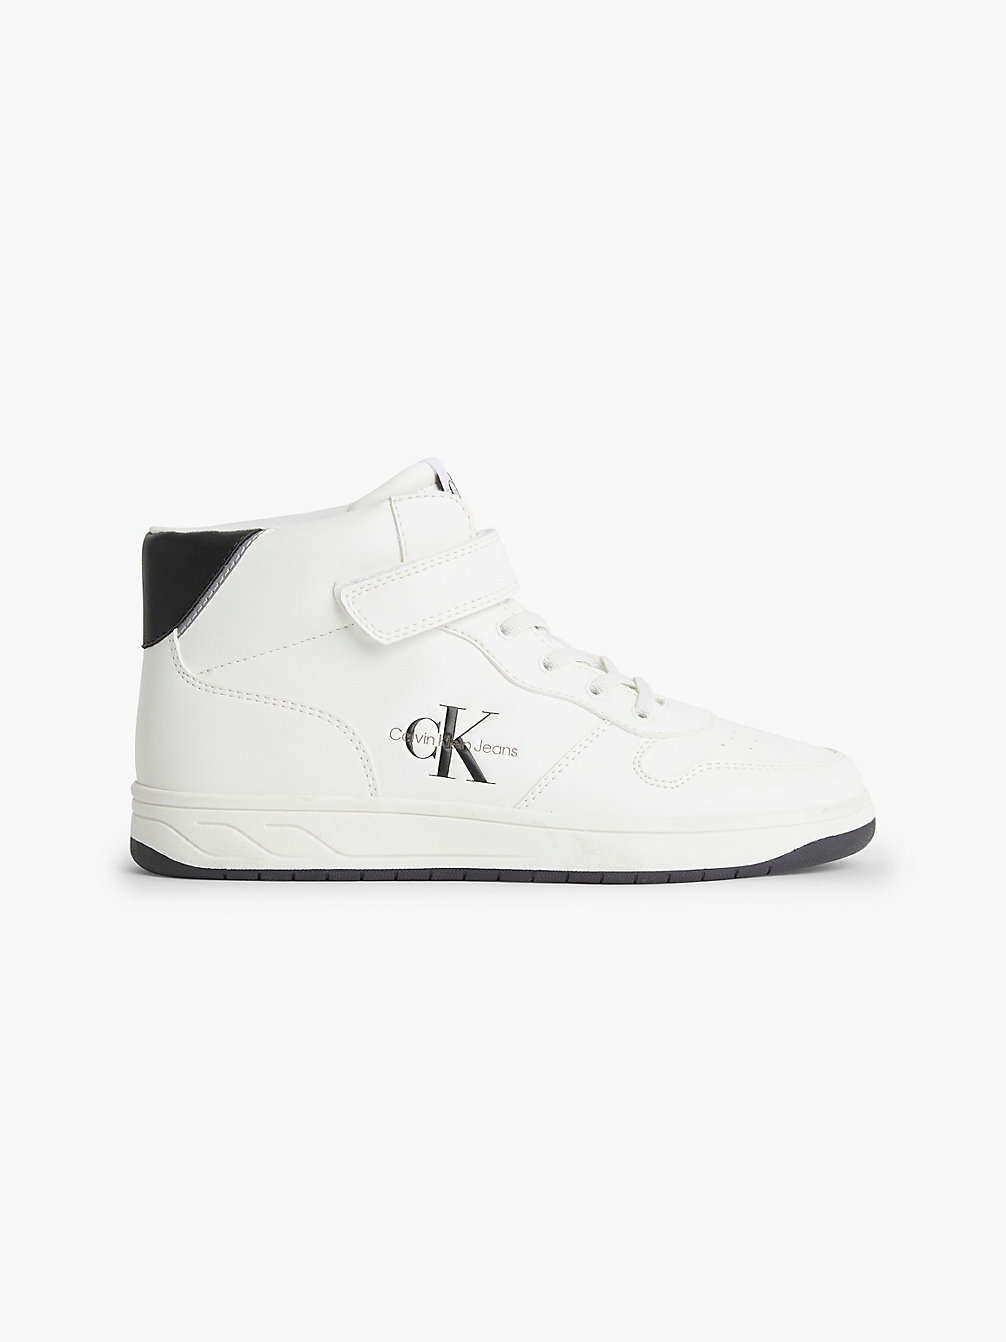 WHITE BLACK Recycled Kids High-Top Trainers undefined kids unisex Calvin Klein